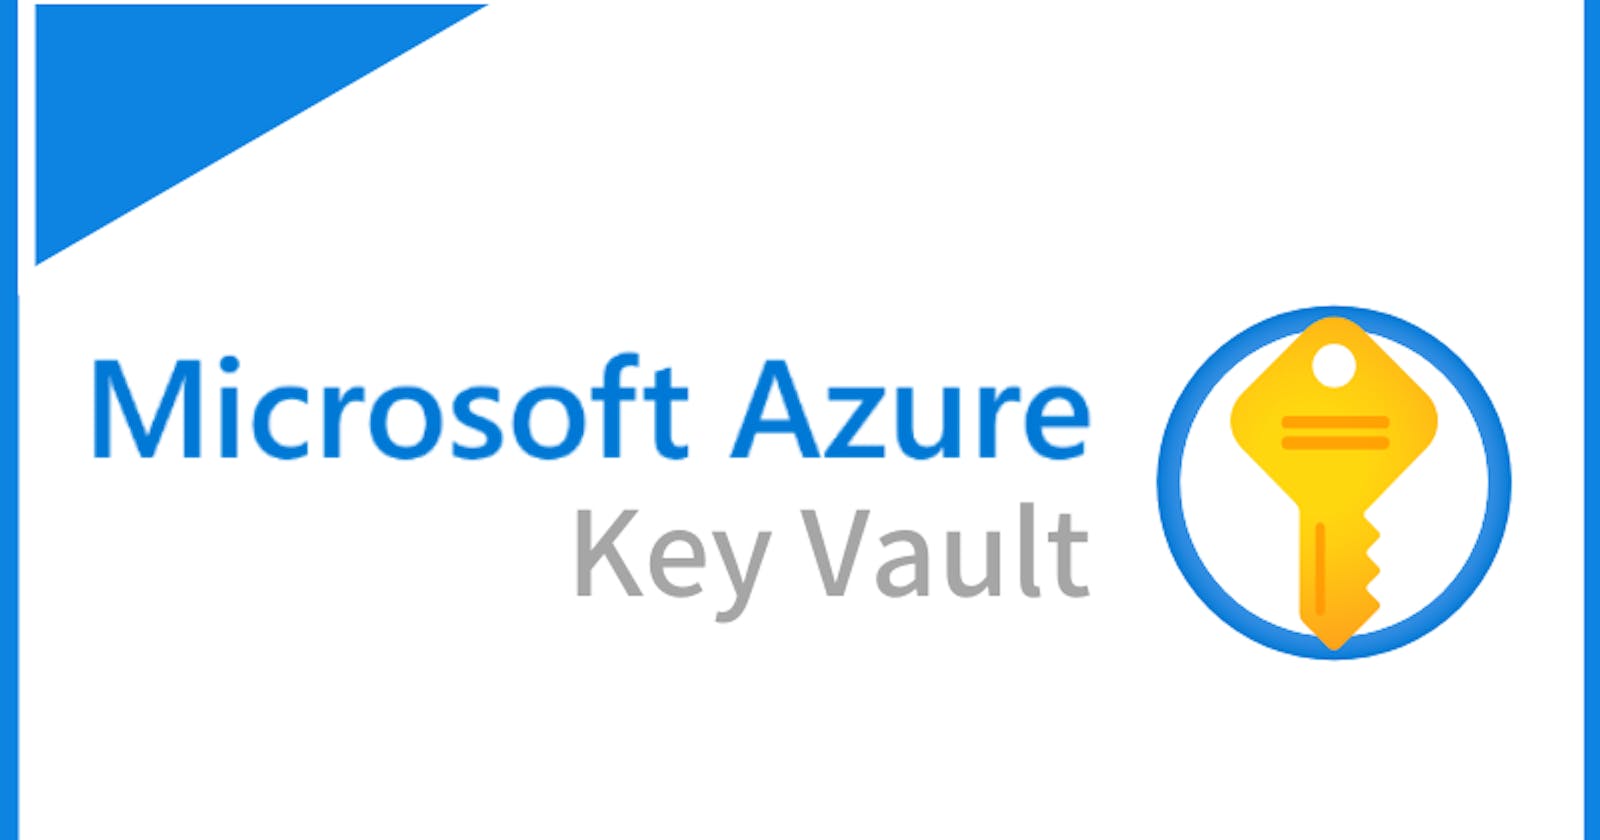 What is Azure Key Vault and how to use it in your Azure Pipeline?